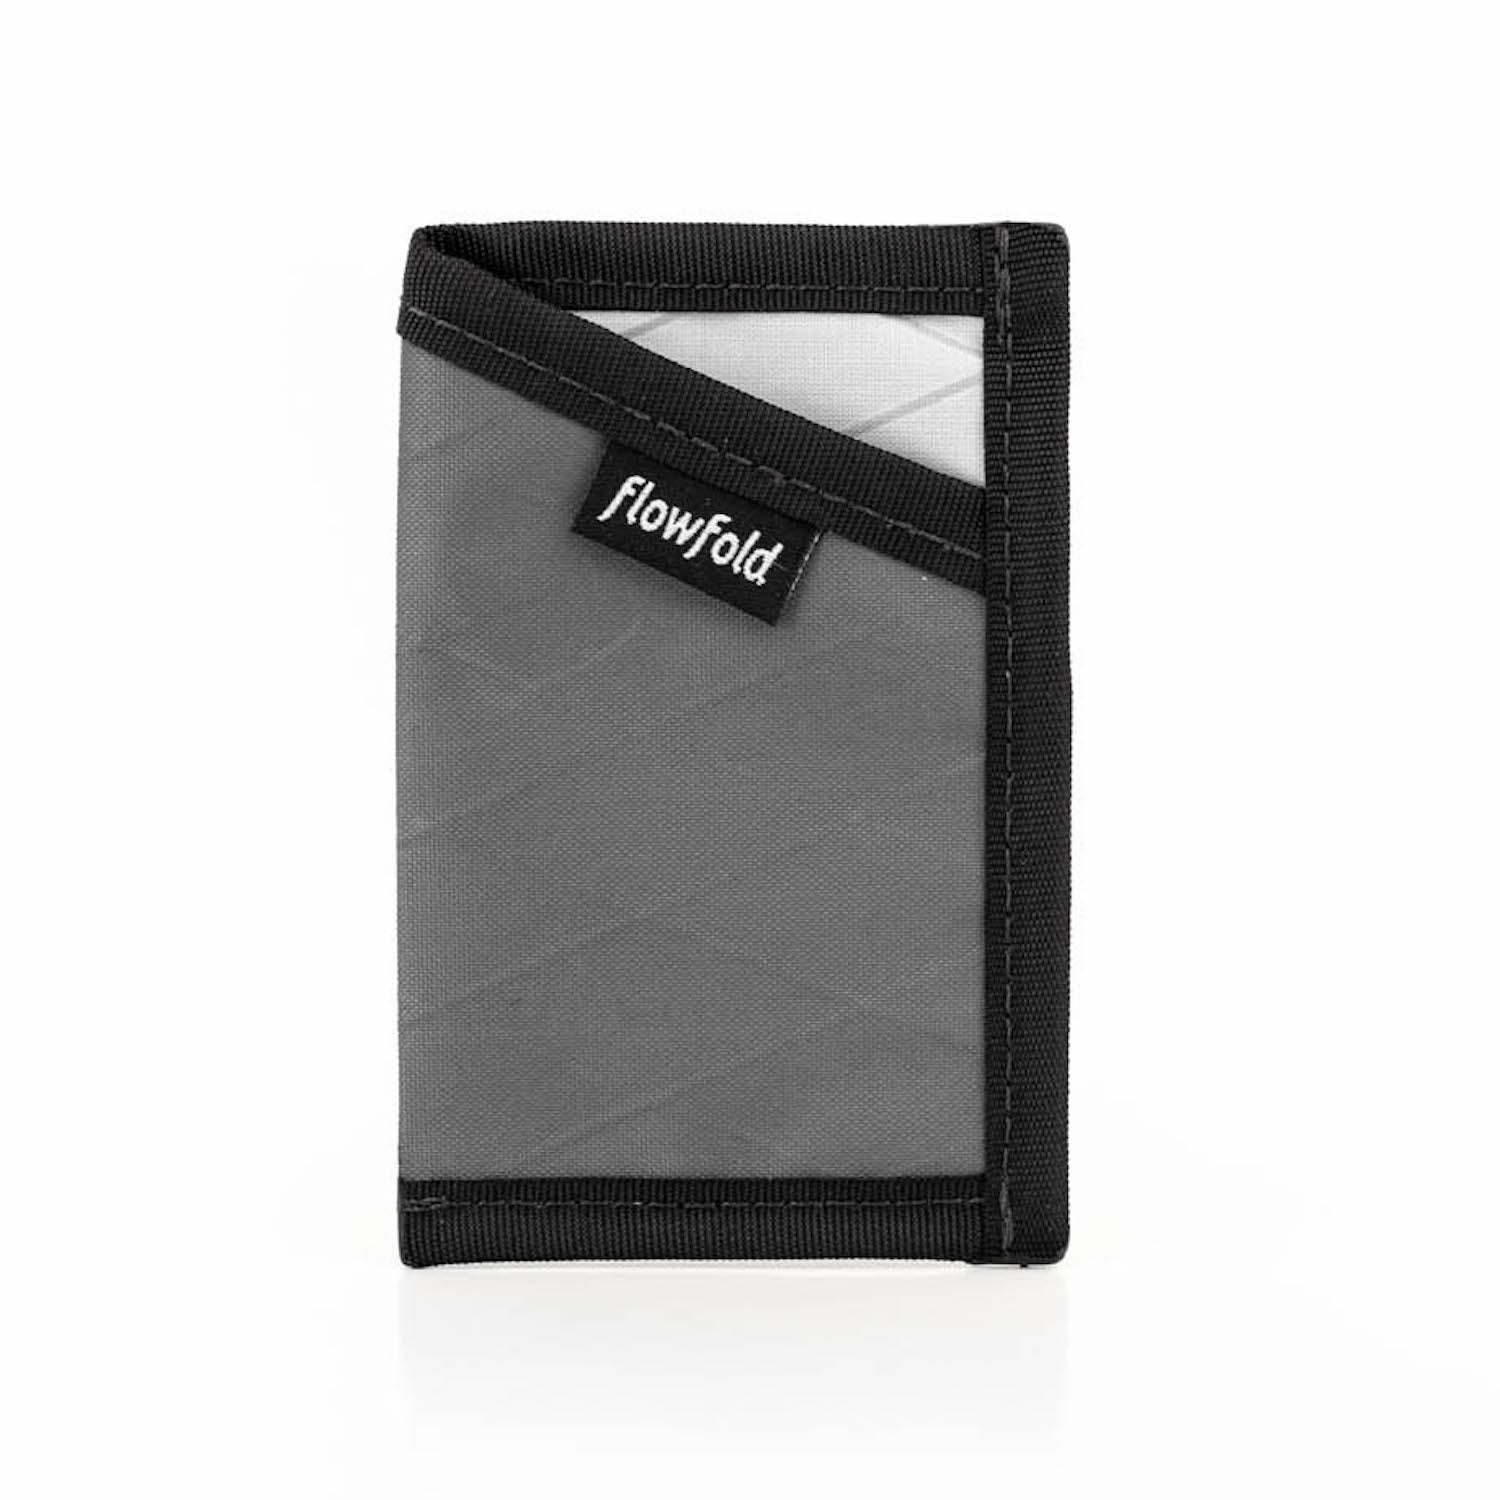 Buy Fidelo ECLIPSE Minimalist Wallet Faceplates – Slim Wallet Credit Card  Holder NOT INCLUDED, FACEPLATES ONLY / Gunmetal Gray (Wallet NOT Included),  One Size, Minimalist at